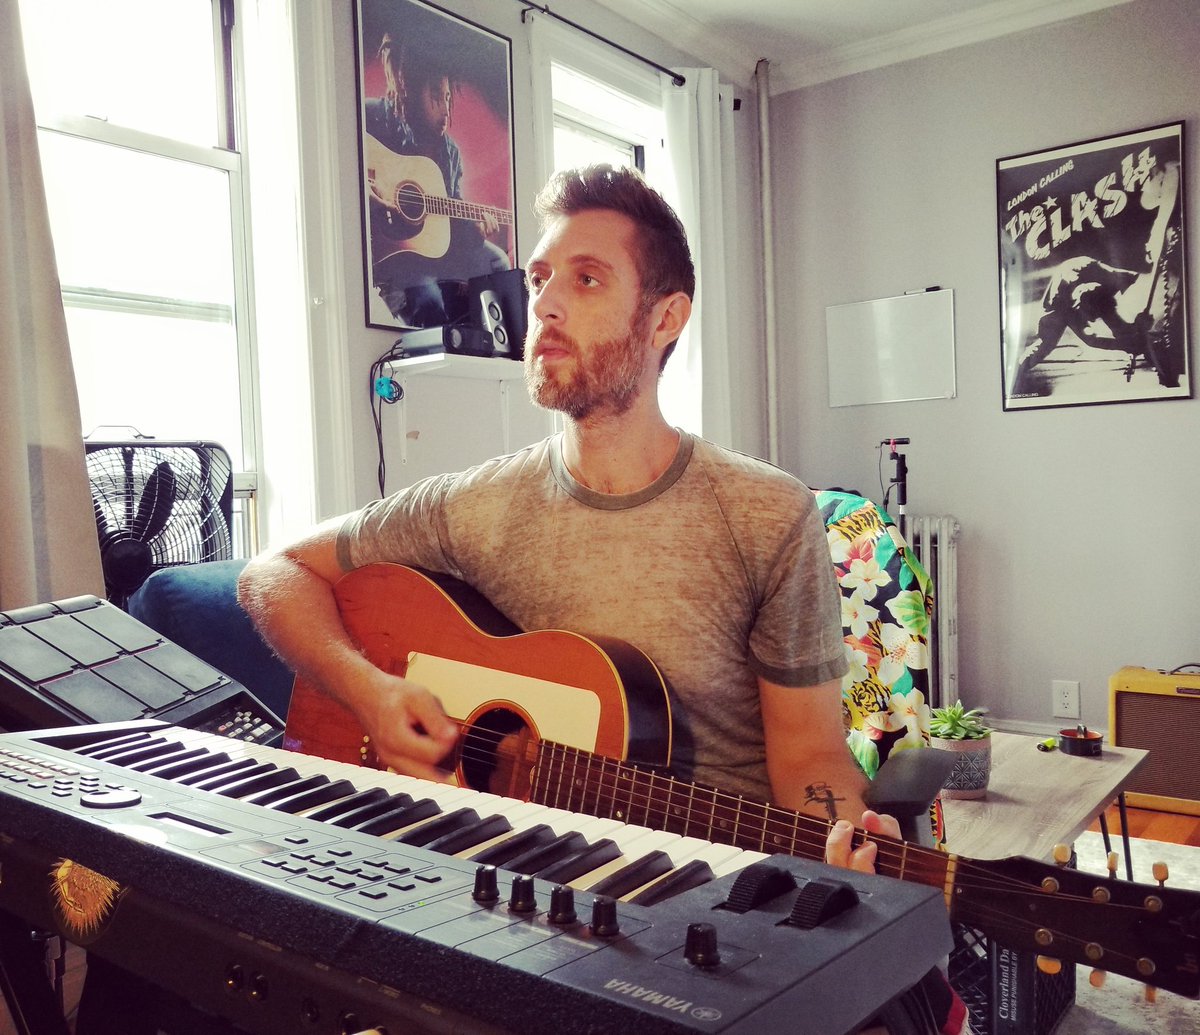 Another day in the office...
#musicianlife #songwriter #gibsonacoustic #spdsx #yamahamx49 #homestudio #dmacburns #newmusic